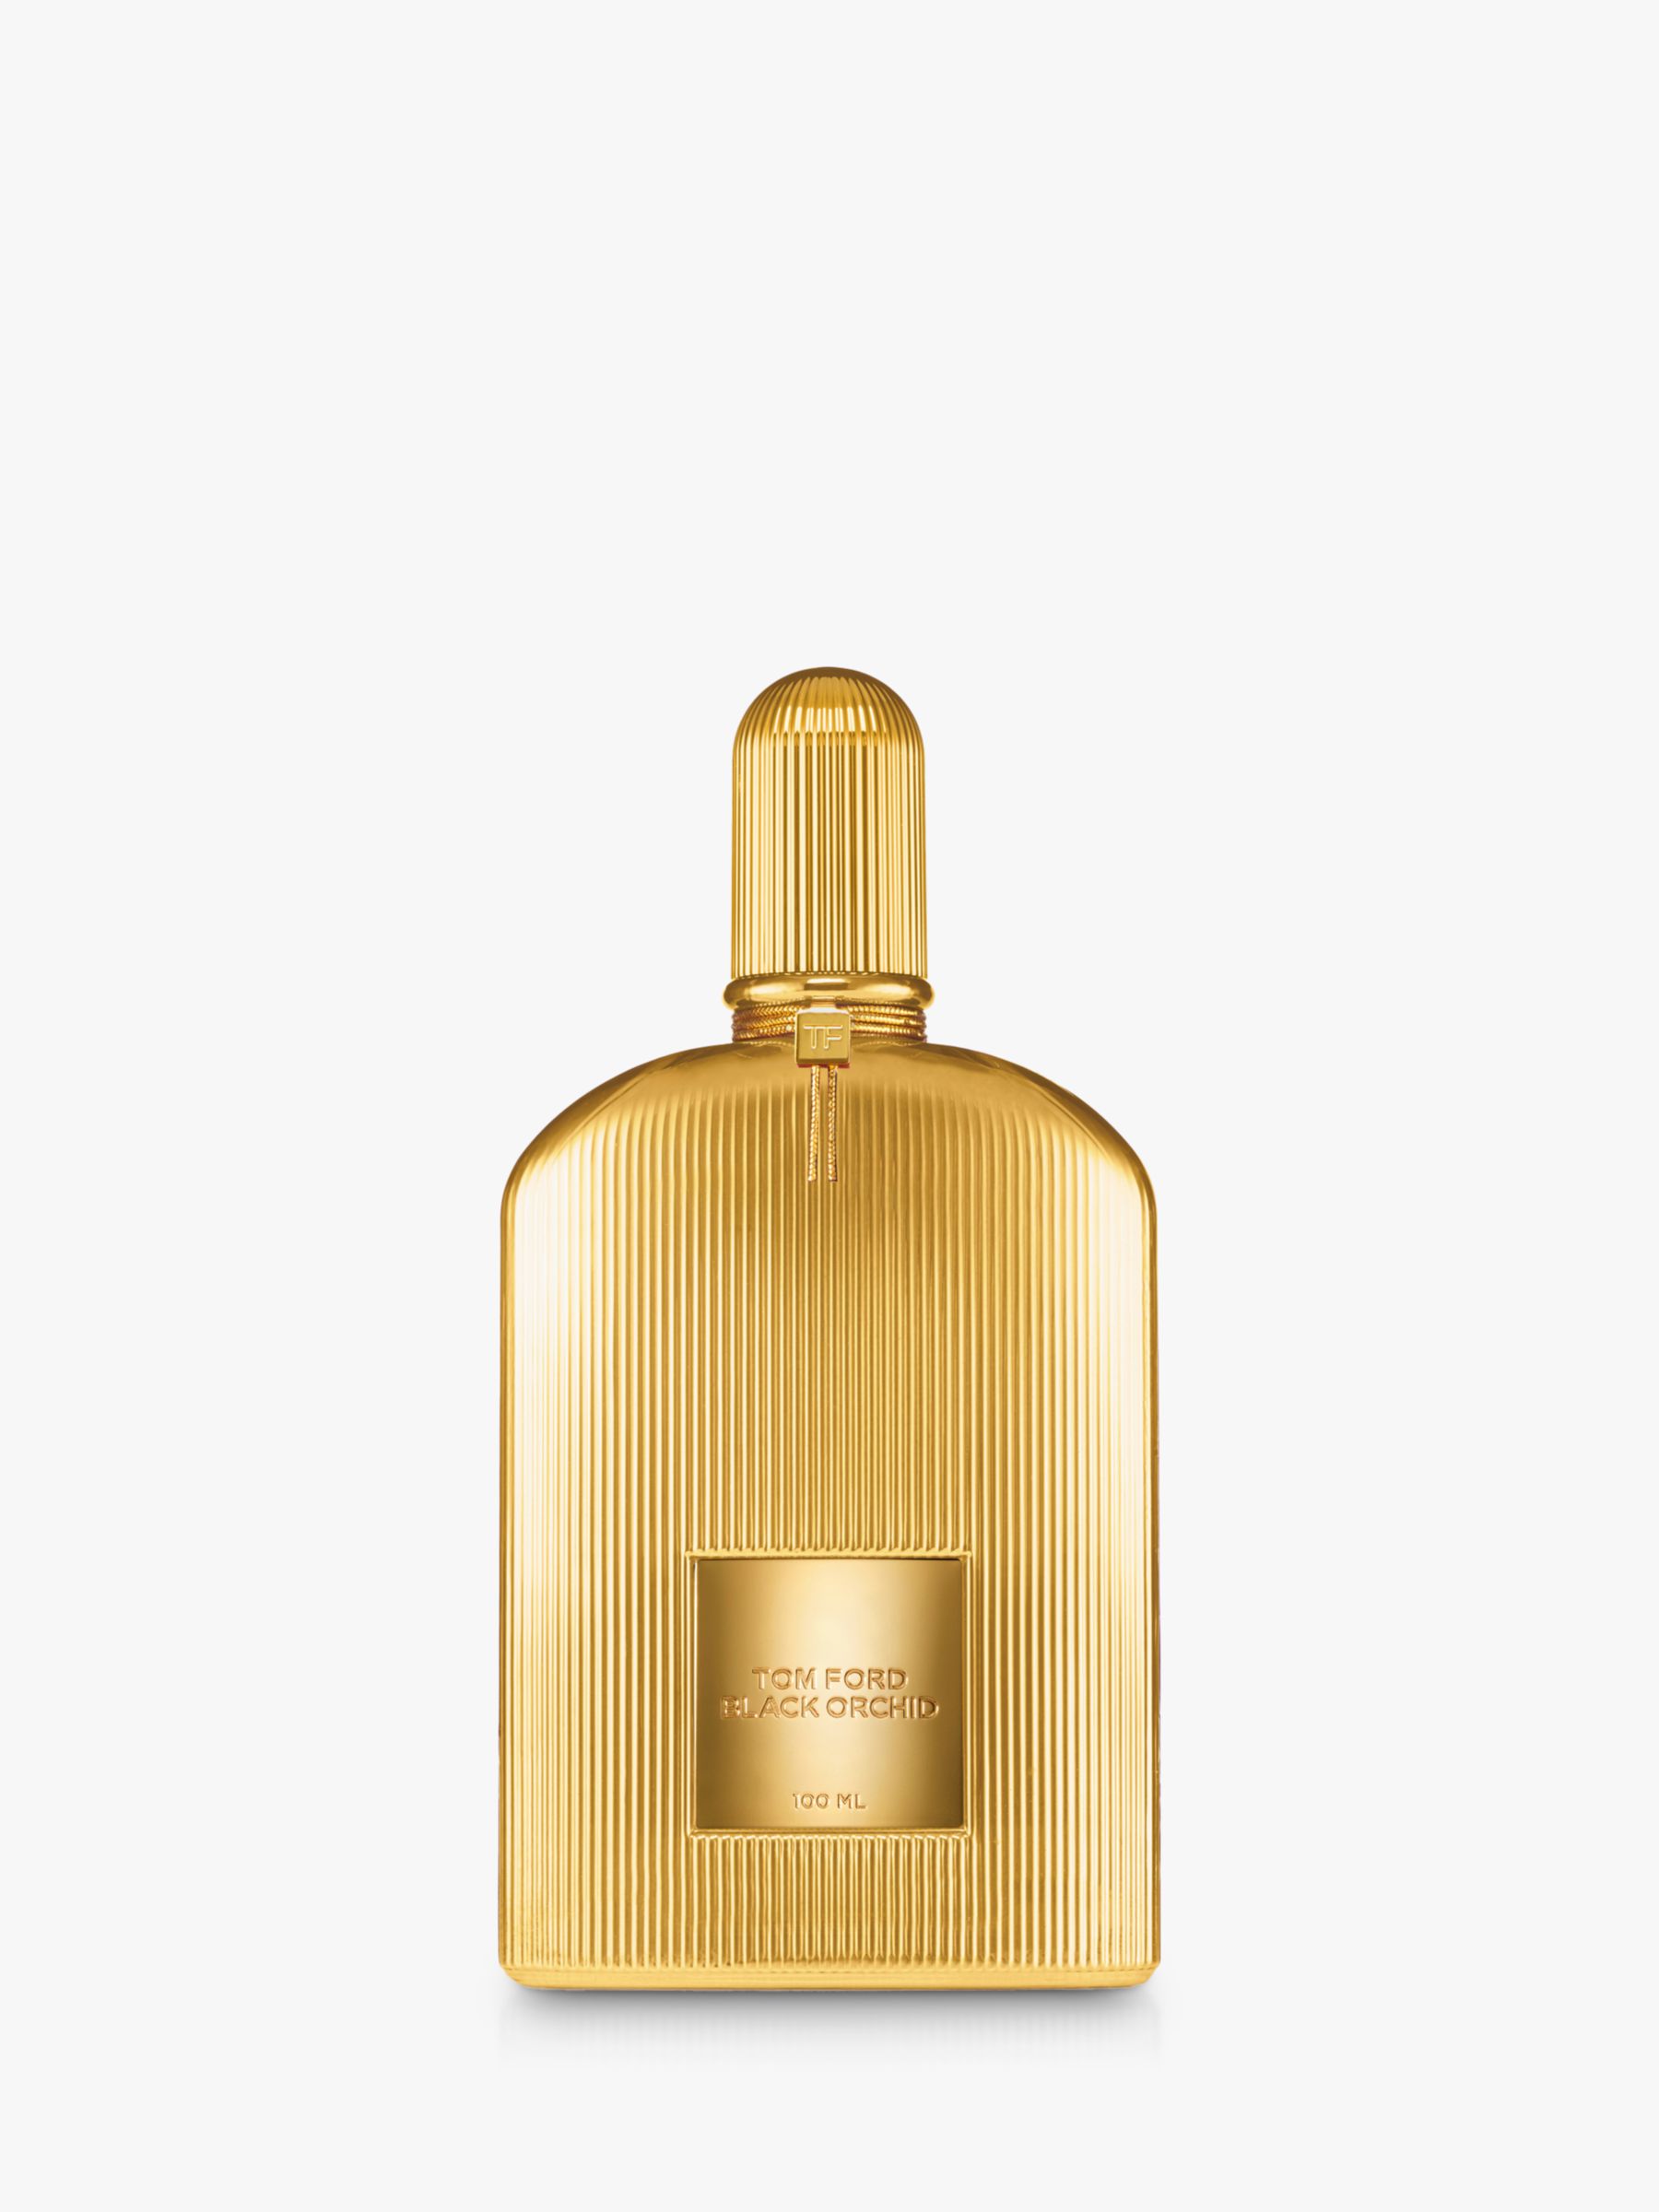 TOM FORD Black Orchid Parfum, 100ml at John Lewis & Partners